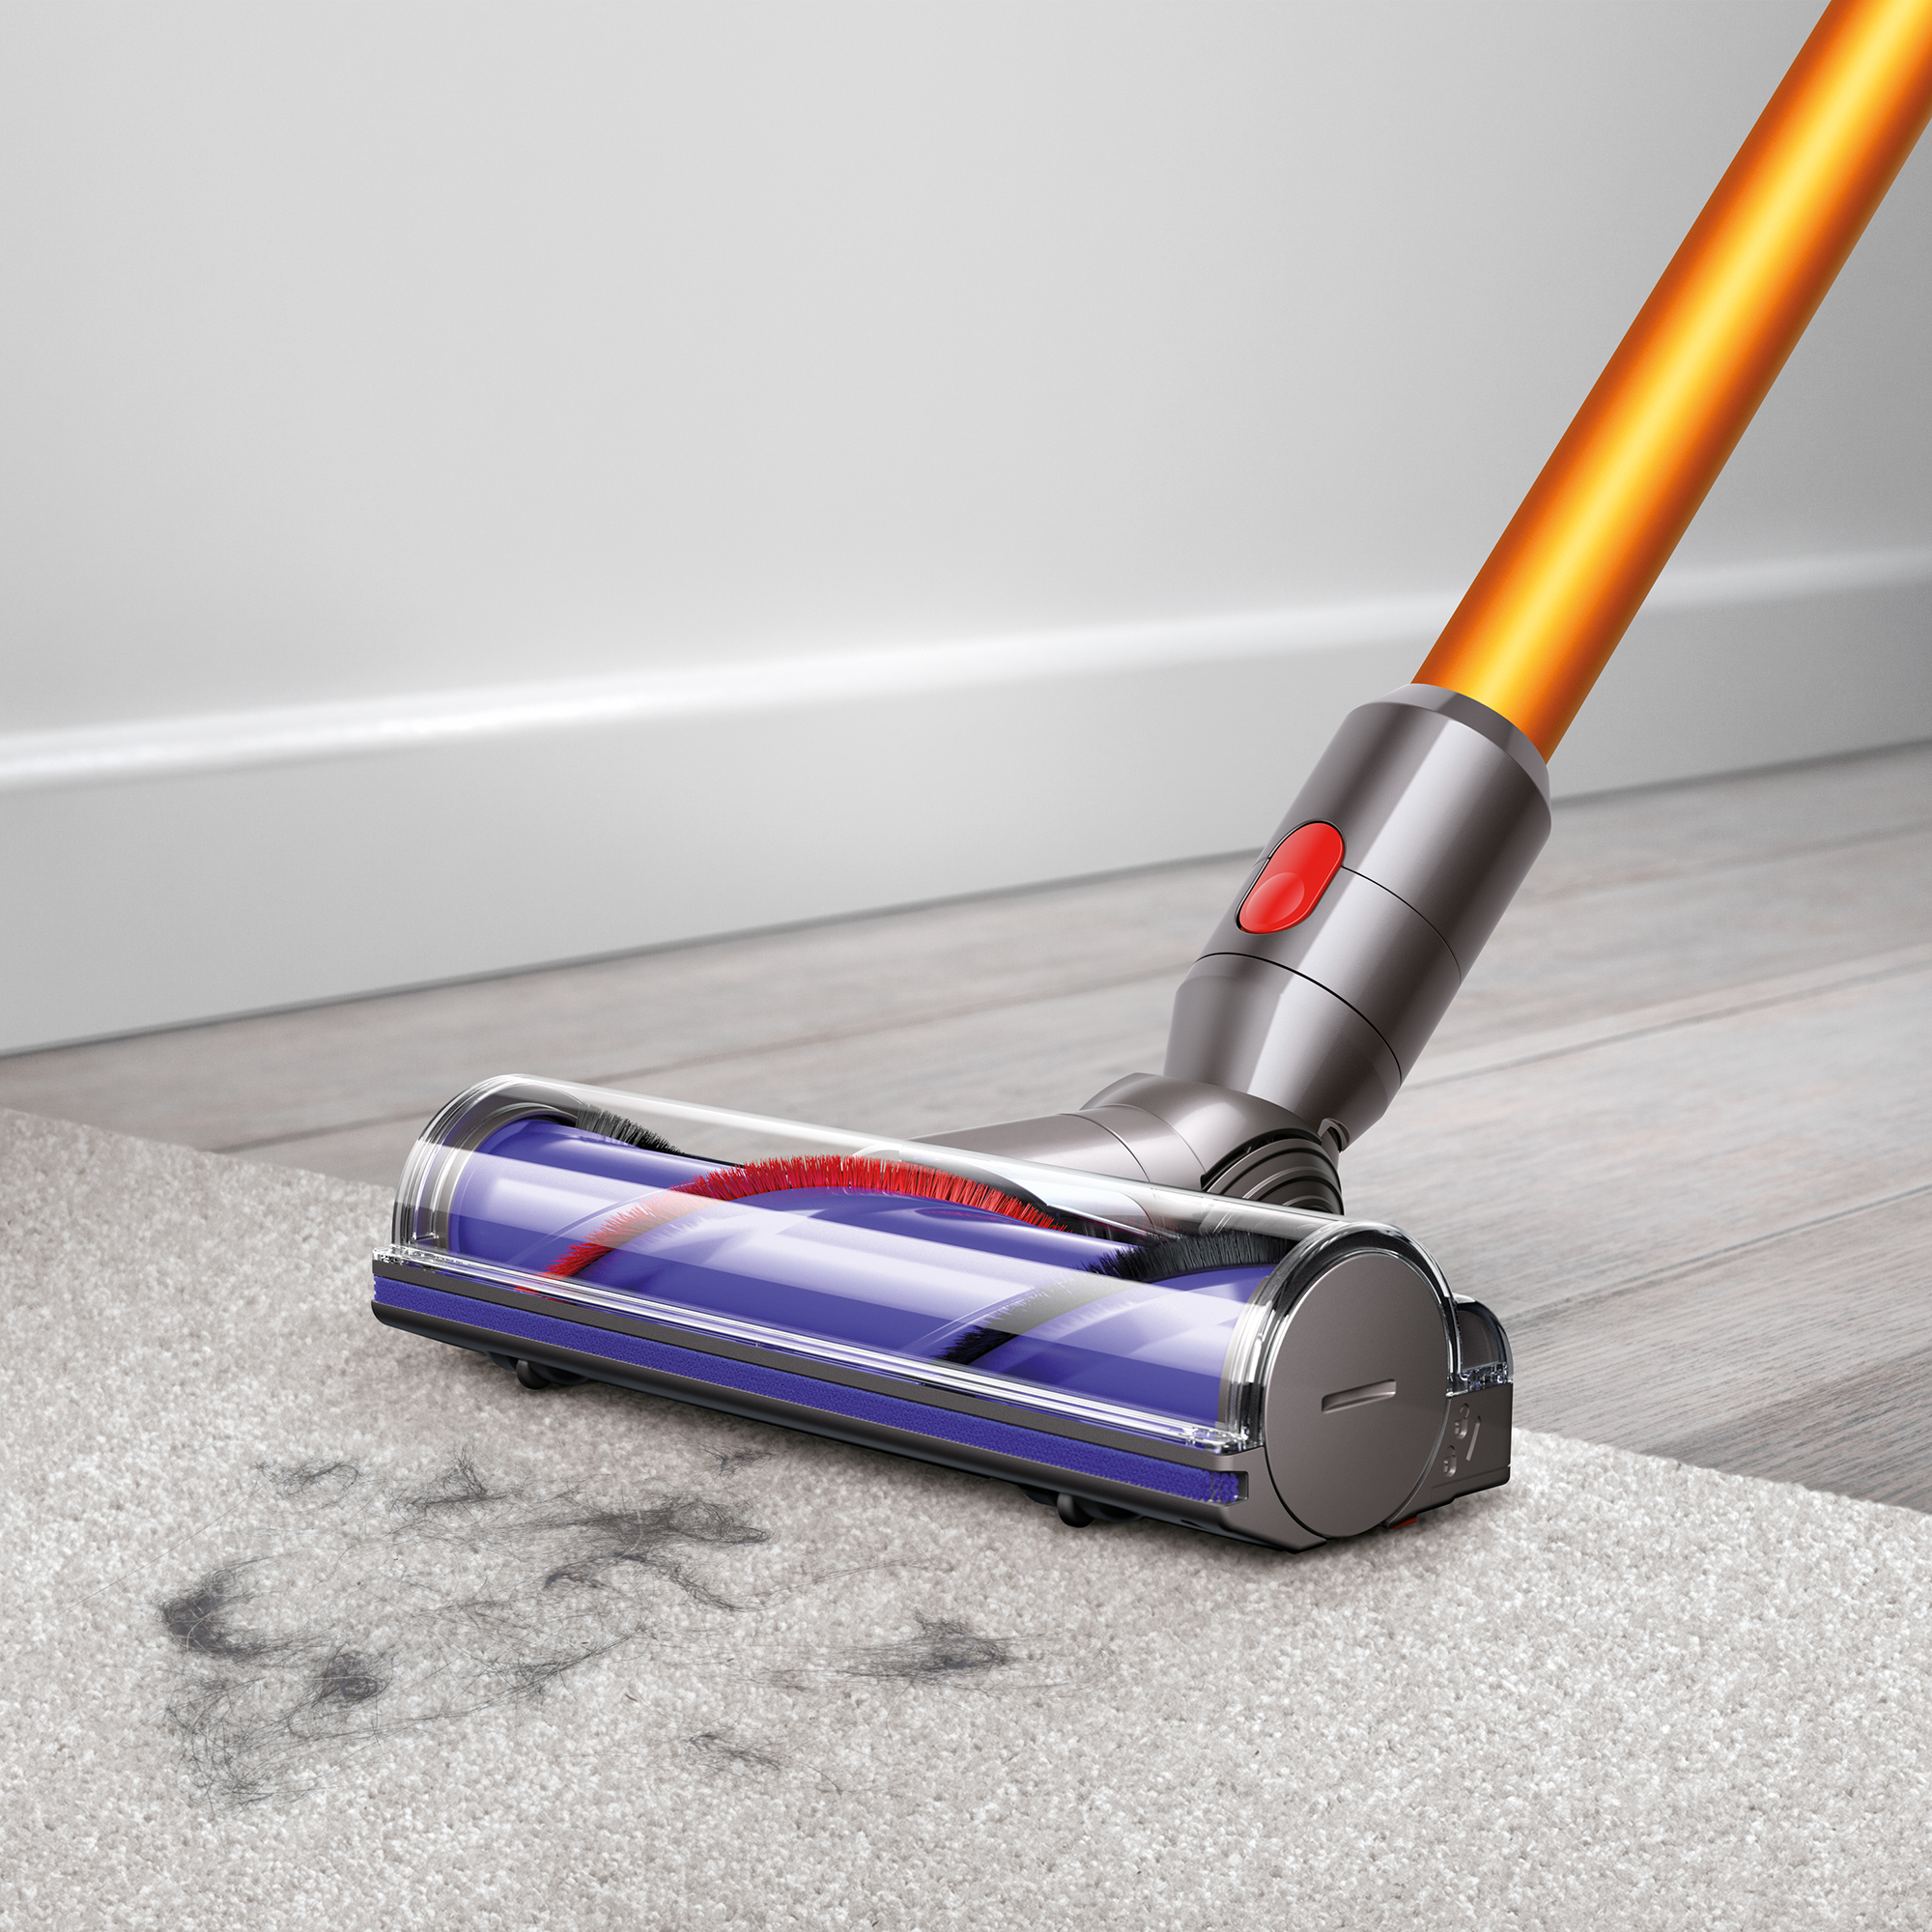 Dyson - V8 Absolute Display Model - image 2 of 6